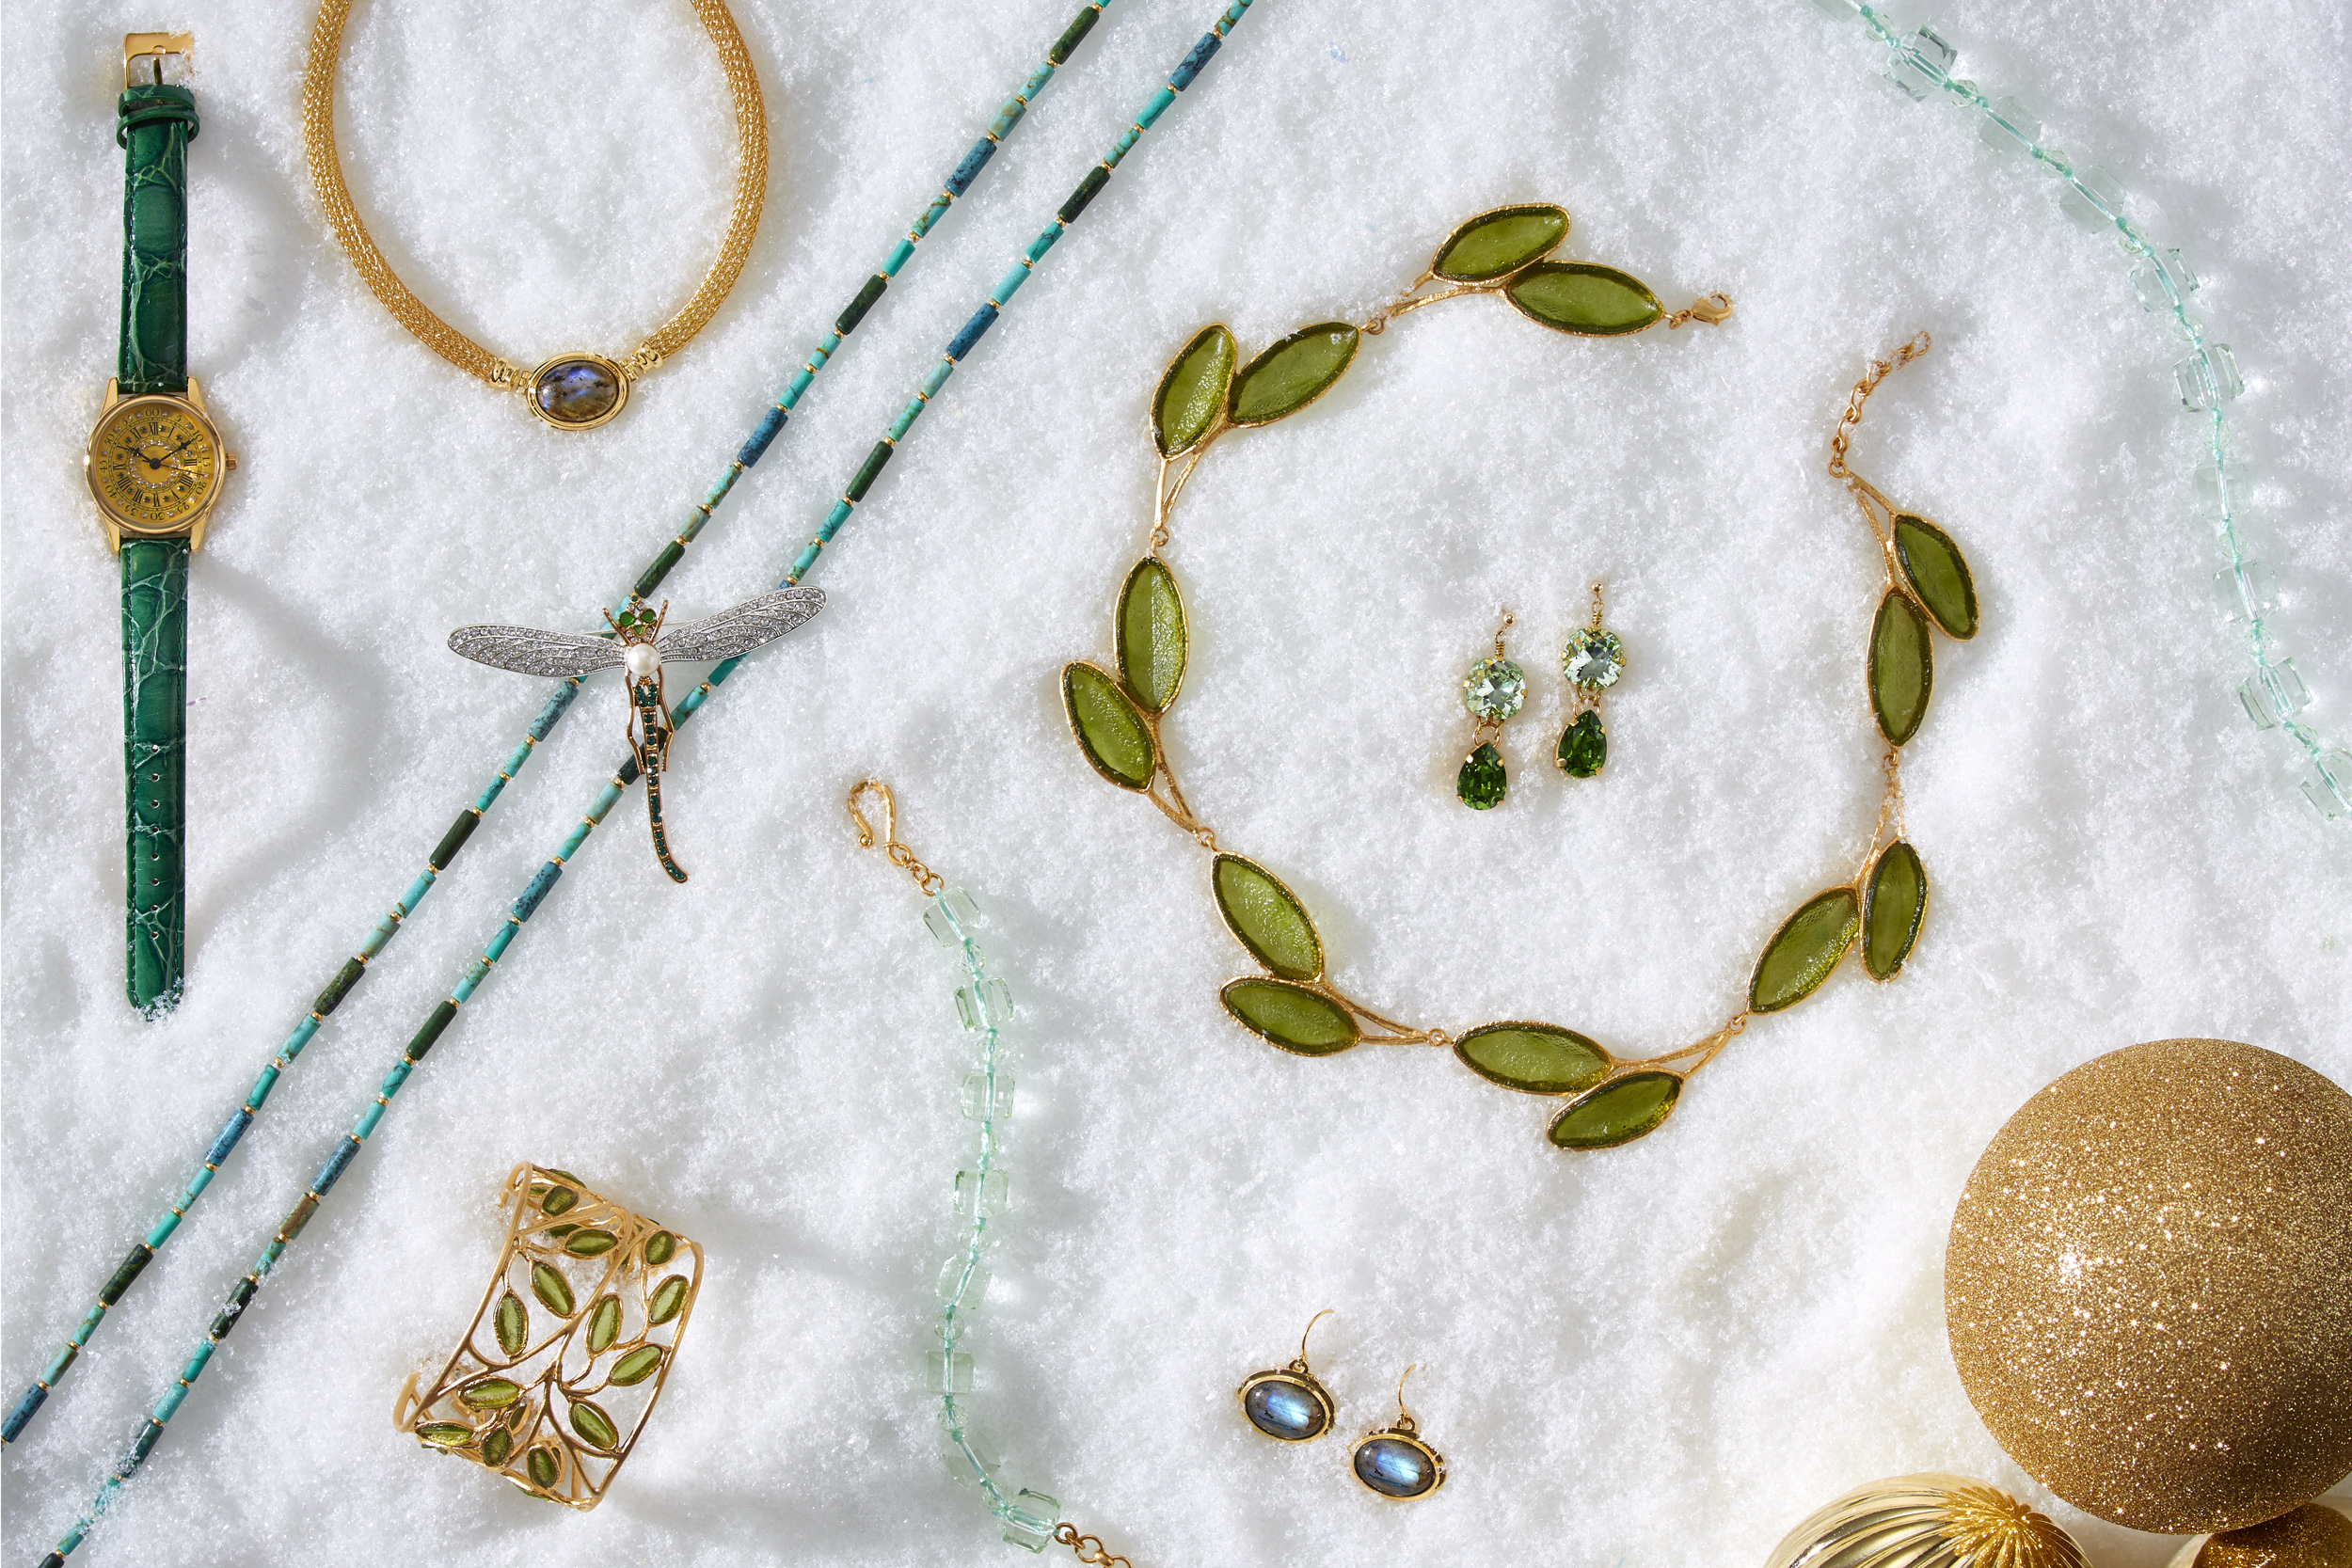 marketing still life photograph of green, gold, and turquoise jewelry including necklaces, earrings, bracelets, a watch, and a pin on snow